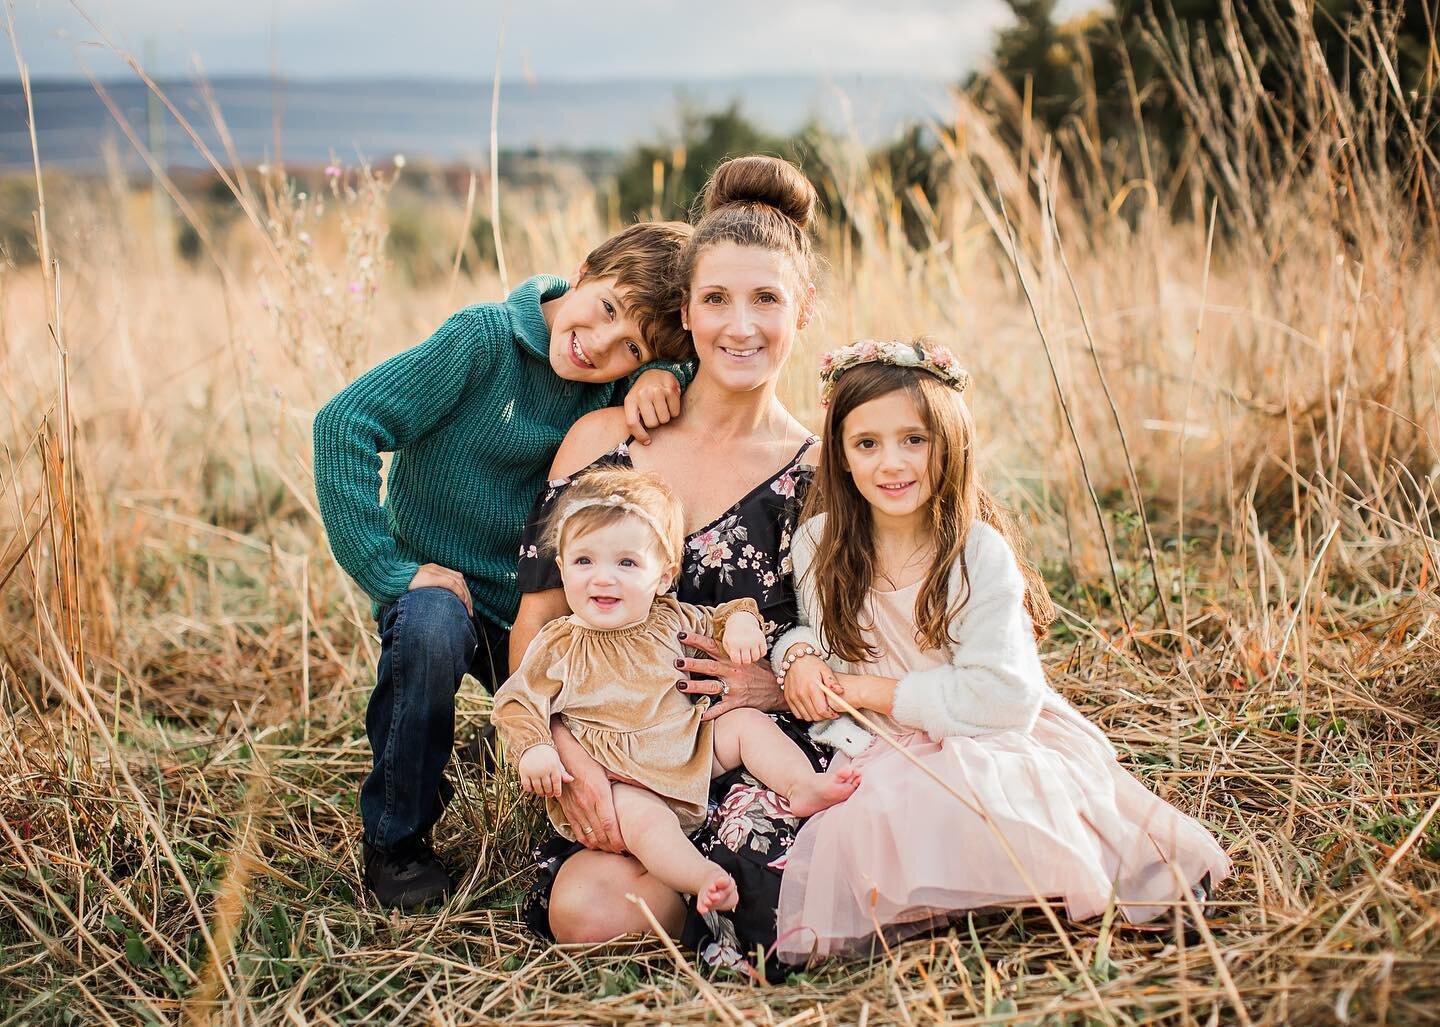 Mom of 3 is not for the faint of heart 😂🤪 But man, I think they are pretty adorable. 

And while most days I&rsquo;m disheveled and tired, (I was surprised I was even able to get myself together for this shoot 😂) I was so happy that I did this for